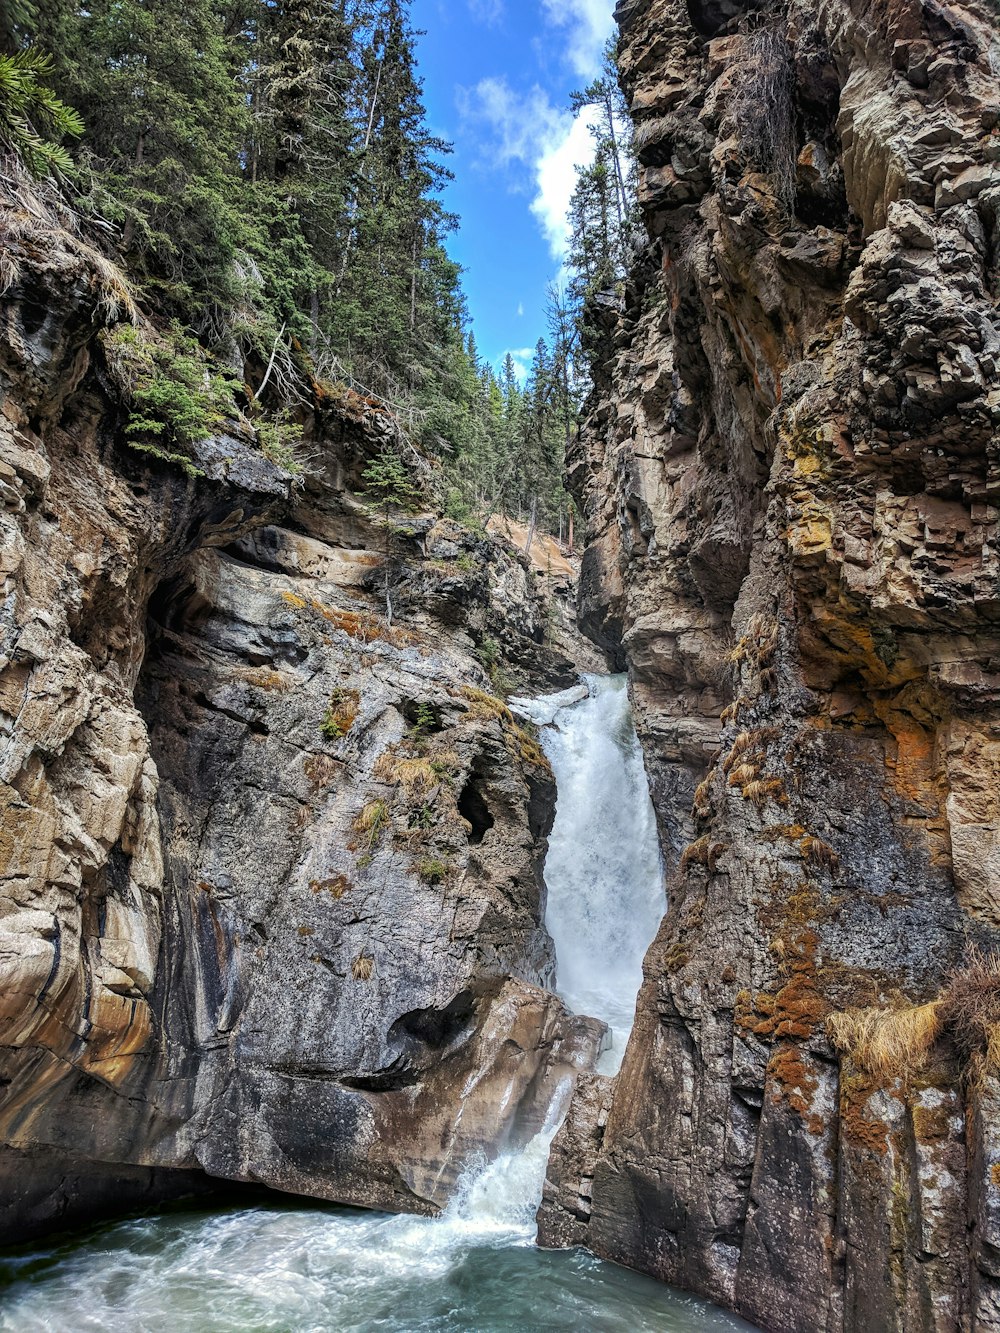 waterfalls between brown rocky mountain under blue sky during daytime